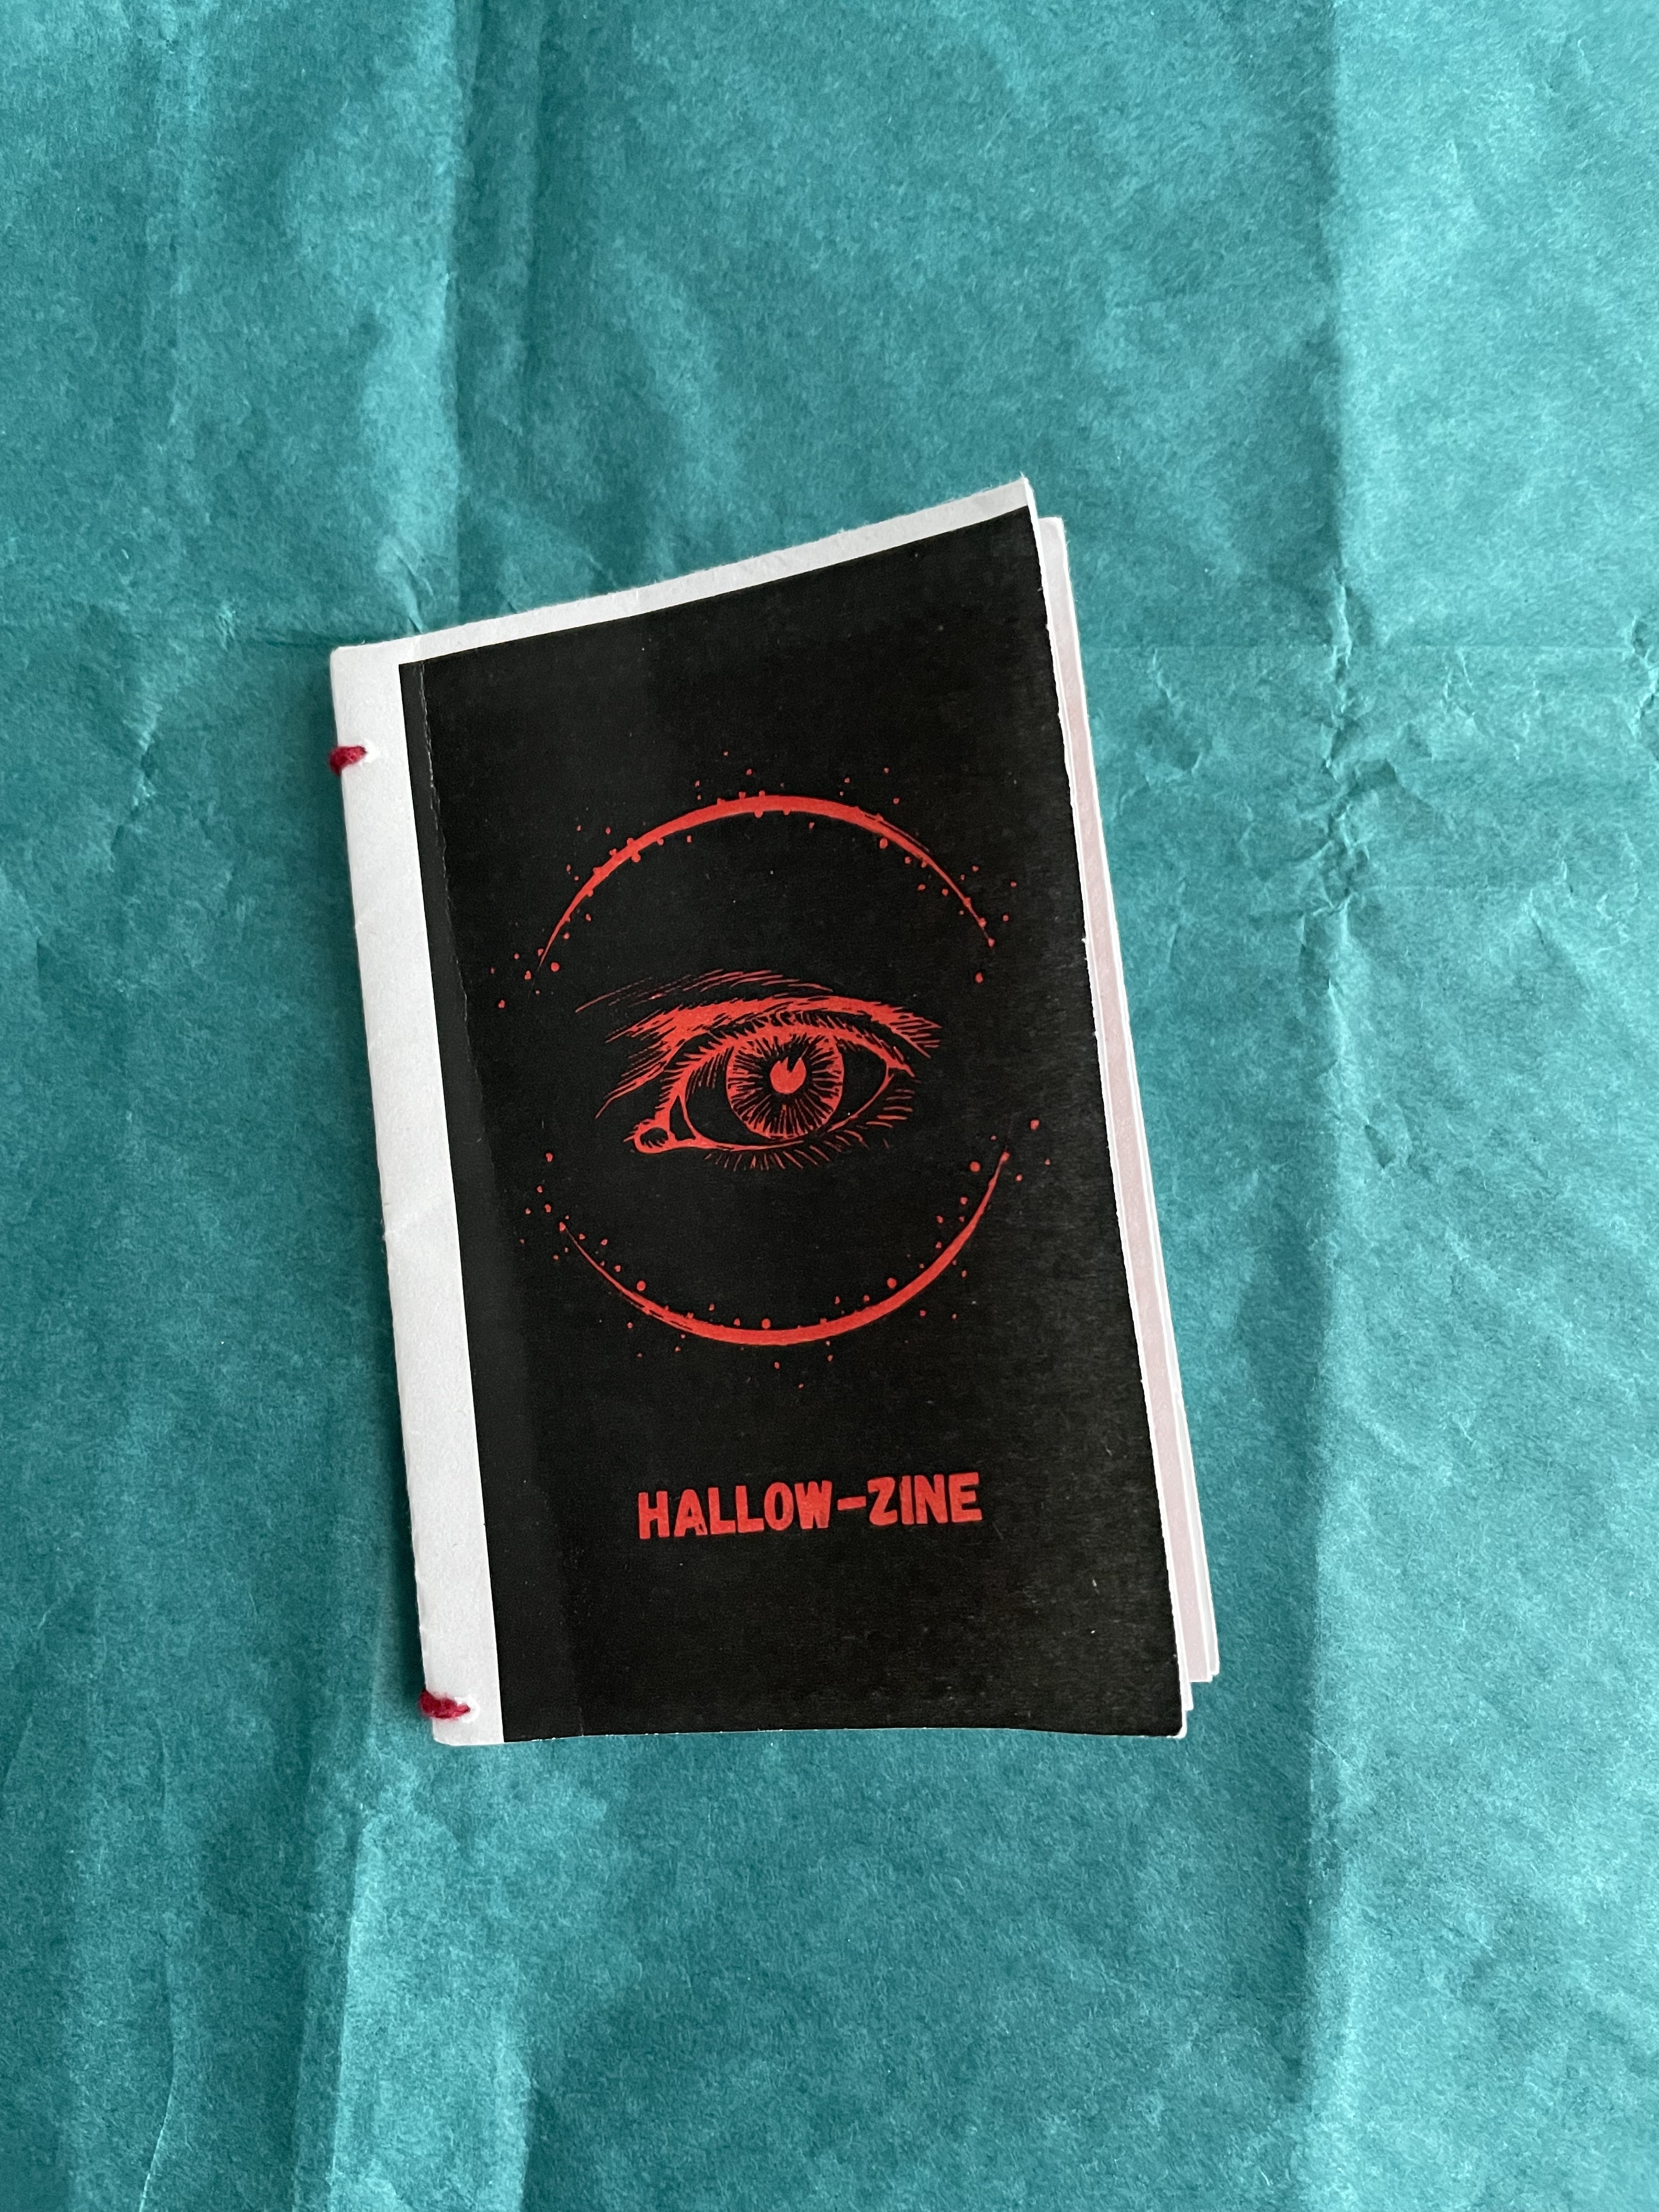 a black zine with a red eye on the cover